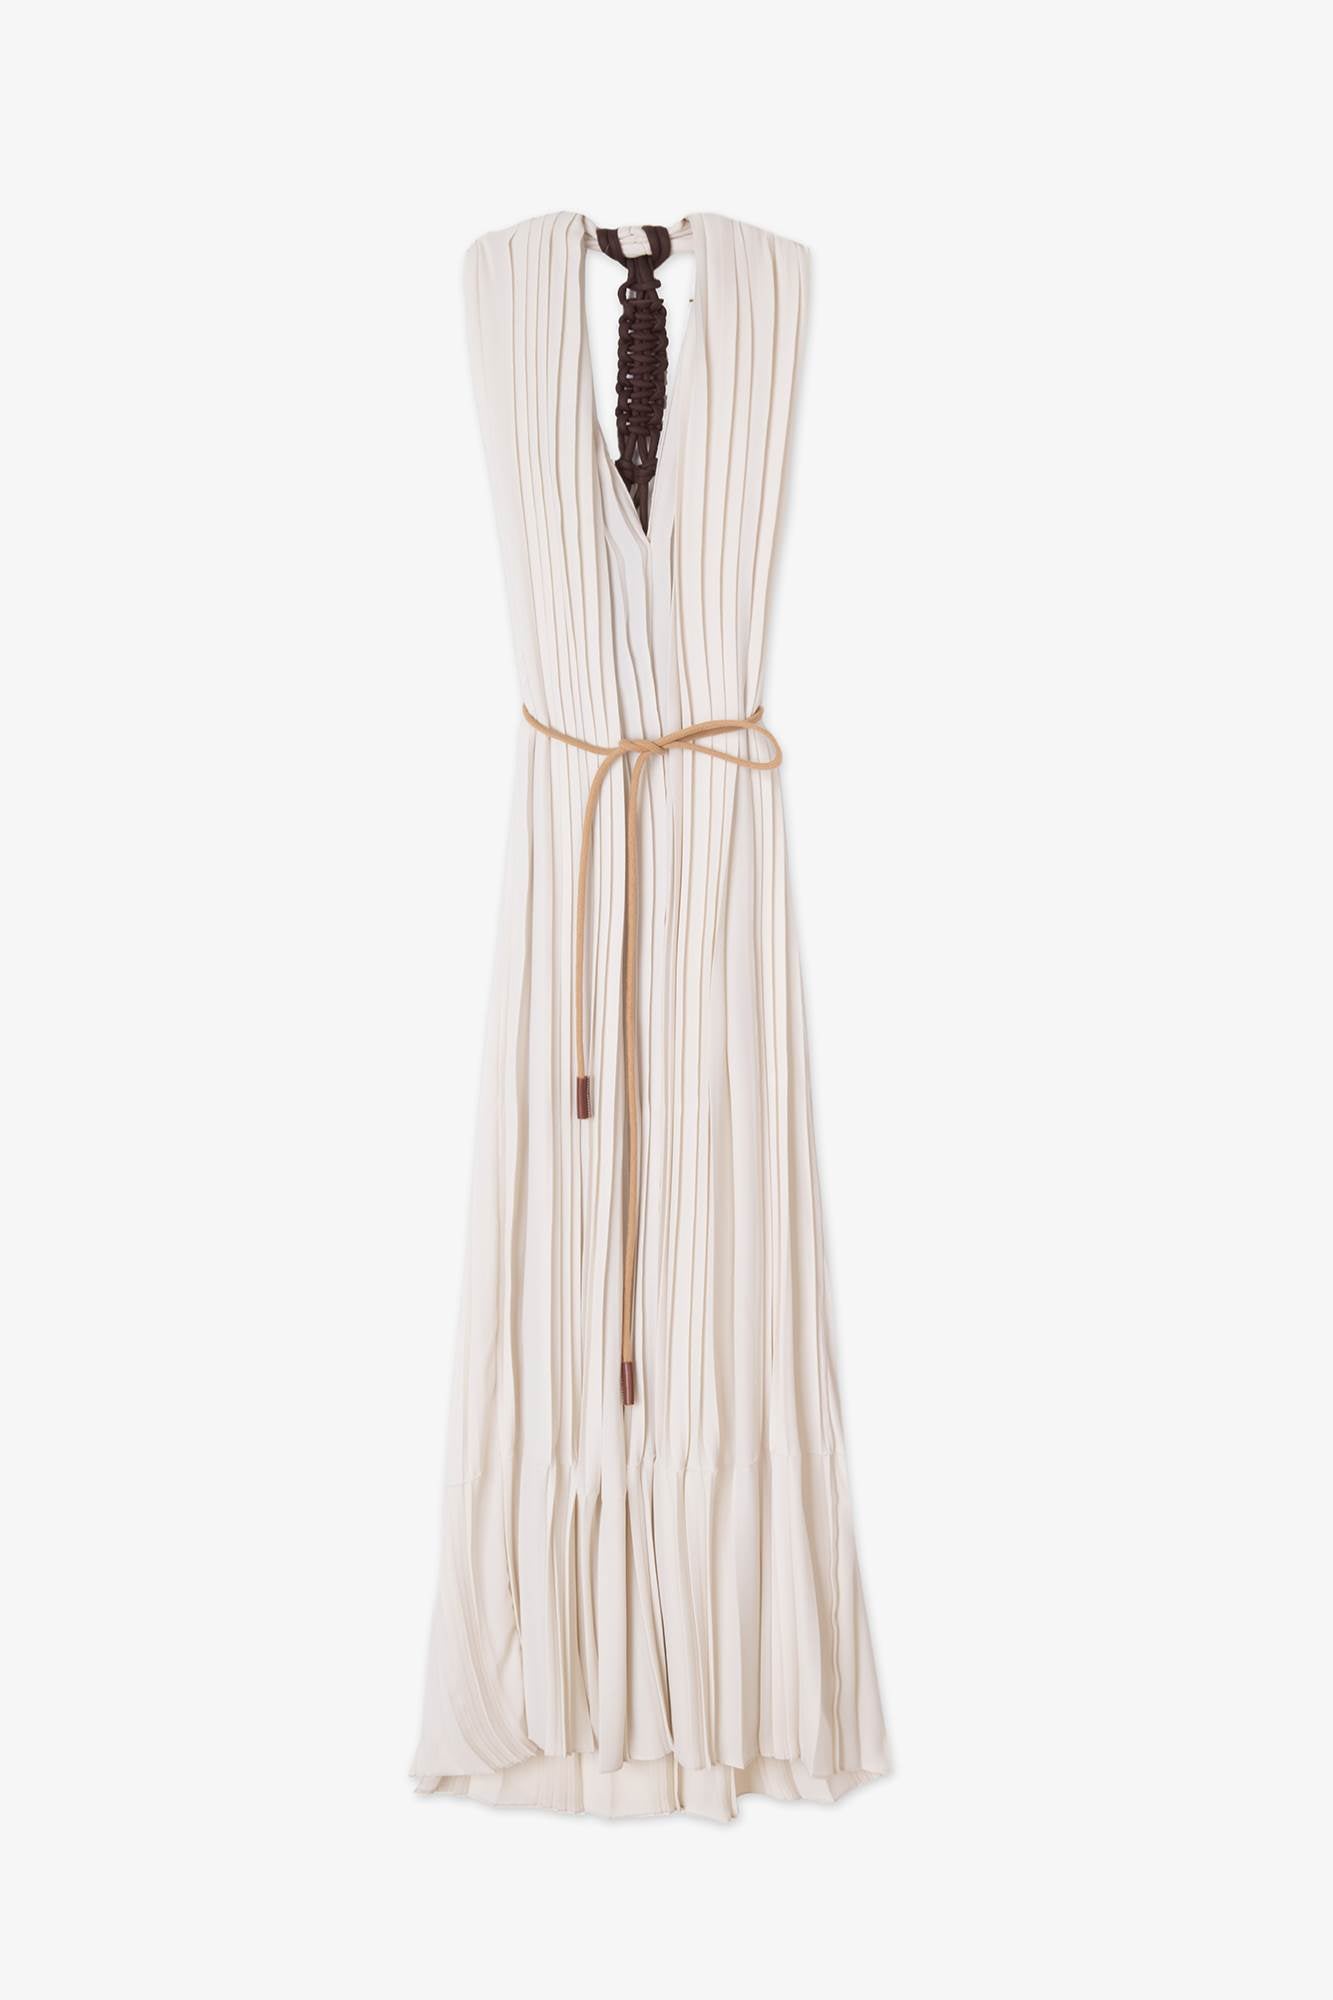 LARGE PLEATED DRESS WITH WEAVED DETAIL